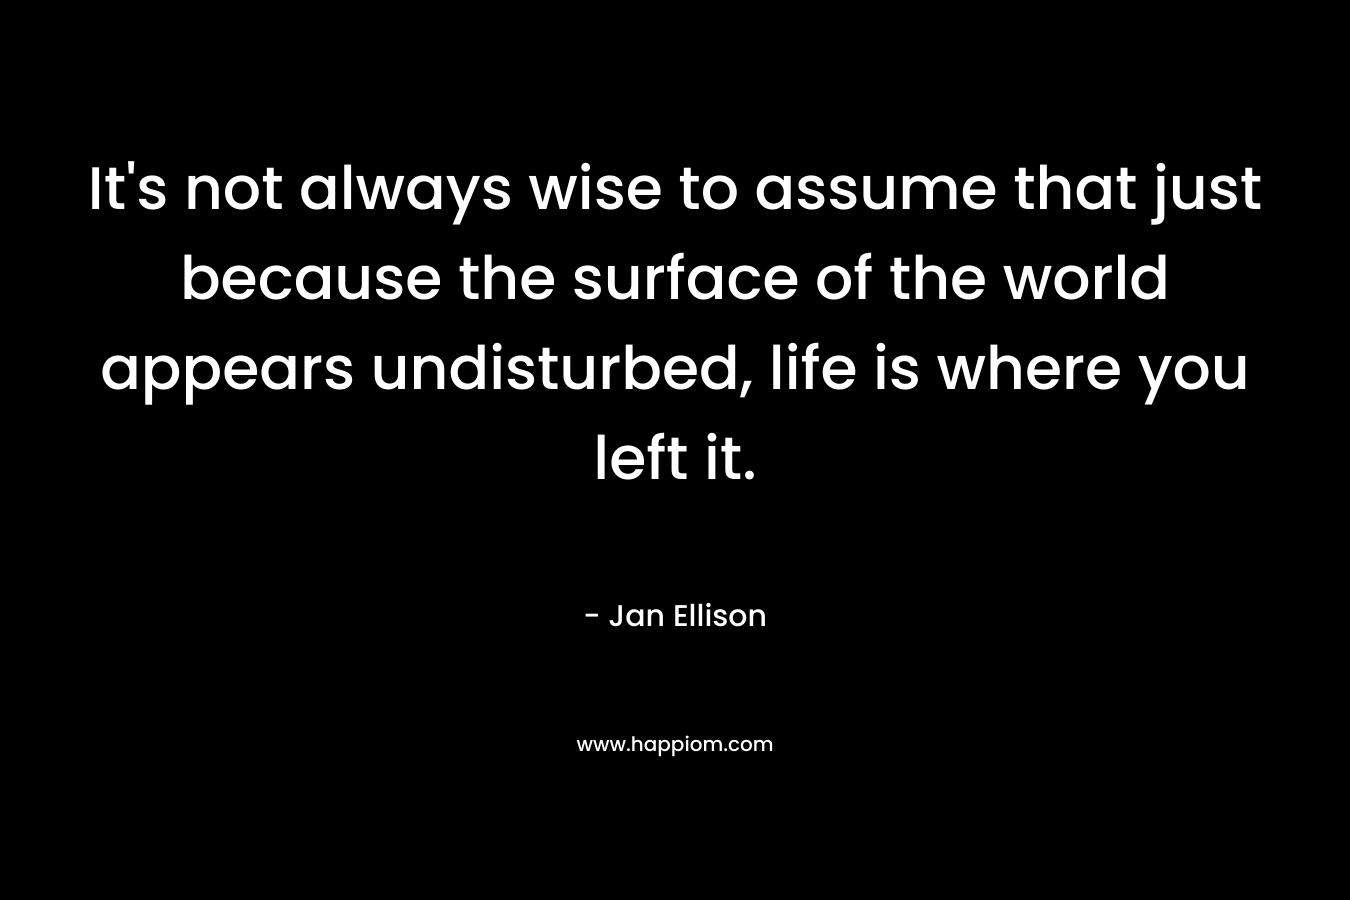 It's not always wise to assume that just because the surface of the world appears undisturbed, life is where you left it.